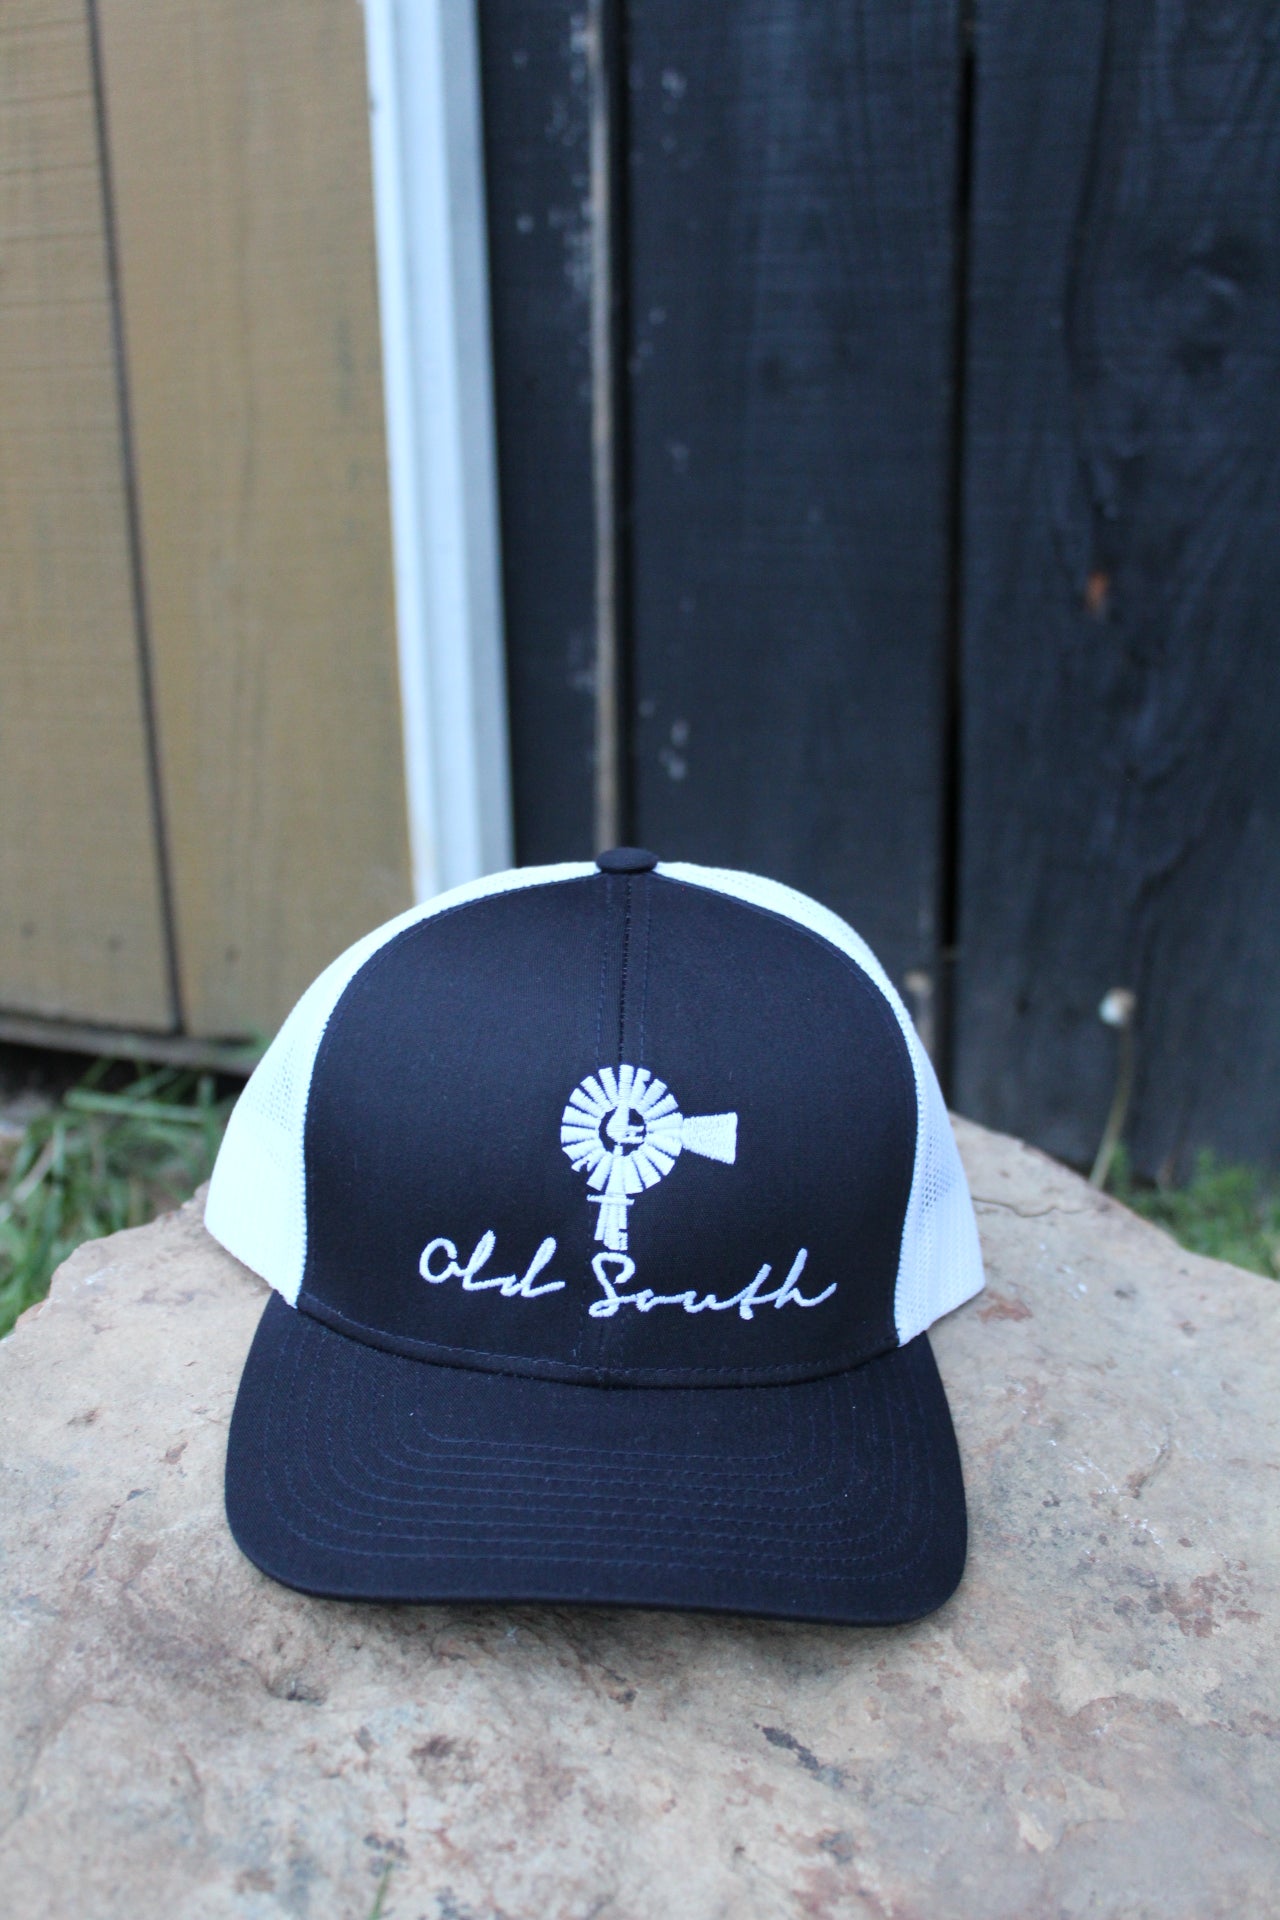 Classic Old South Logo Trucker Hat